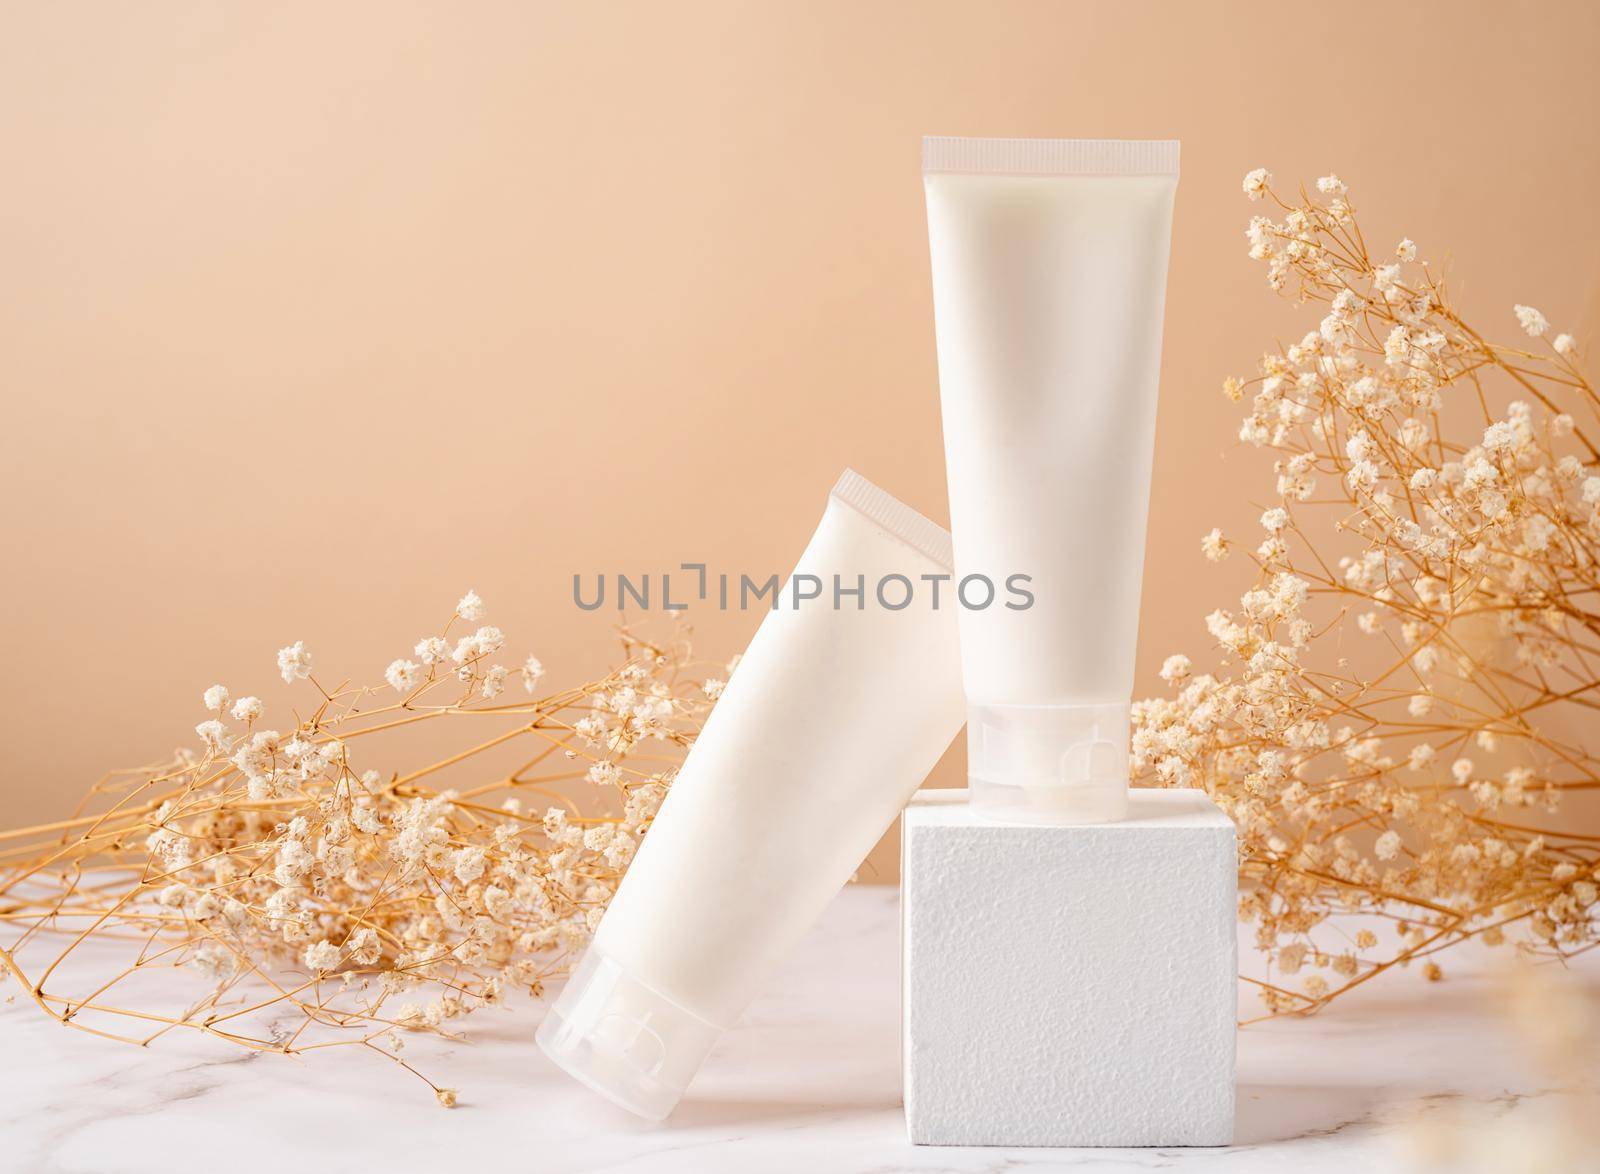 Cream tube mockup for branding presentation. Natural skincare beauty product on square white podium. Natural earthy colors, beige background